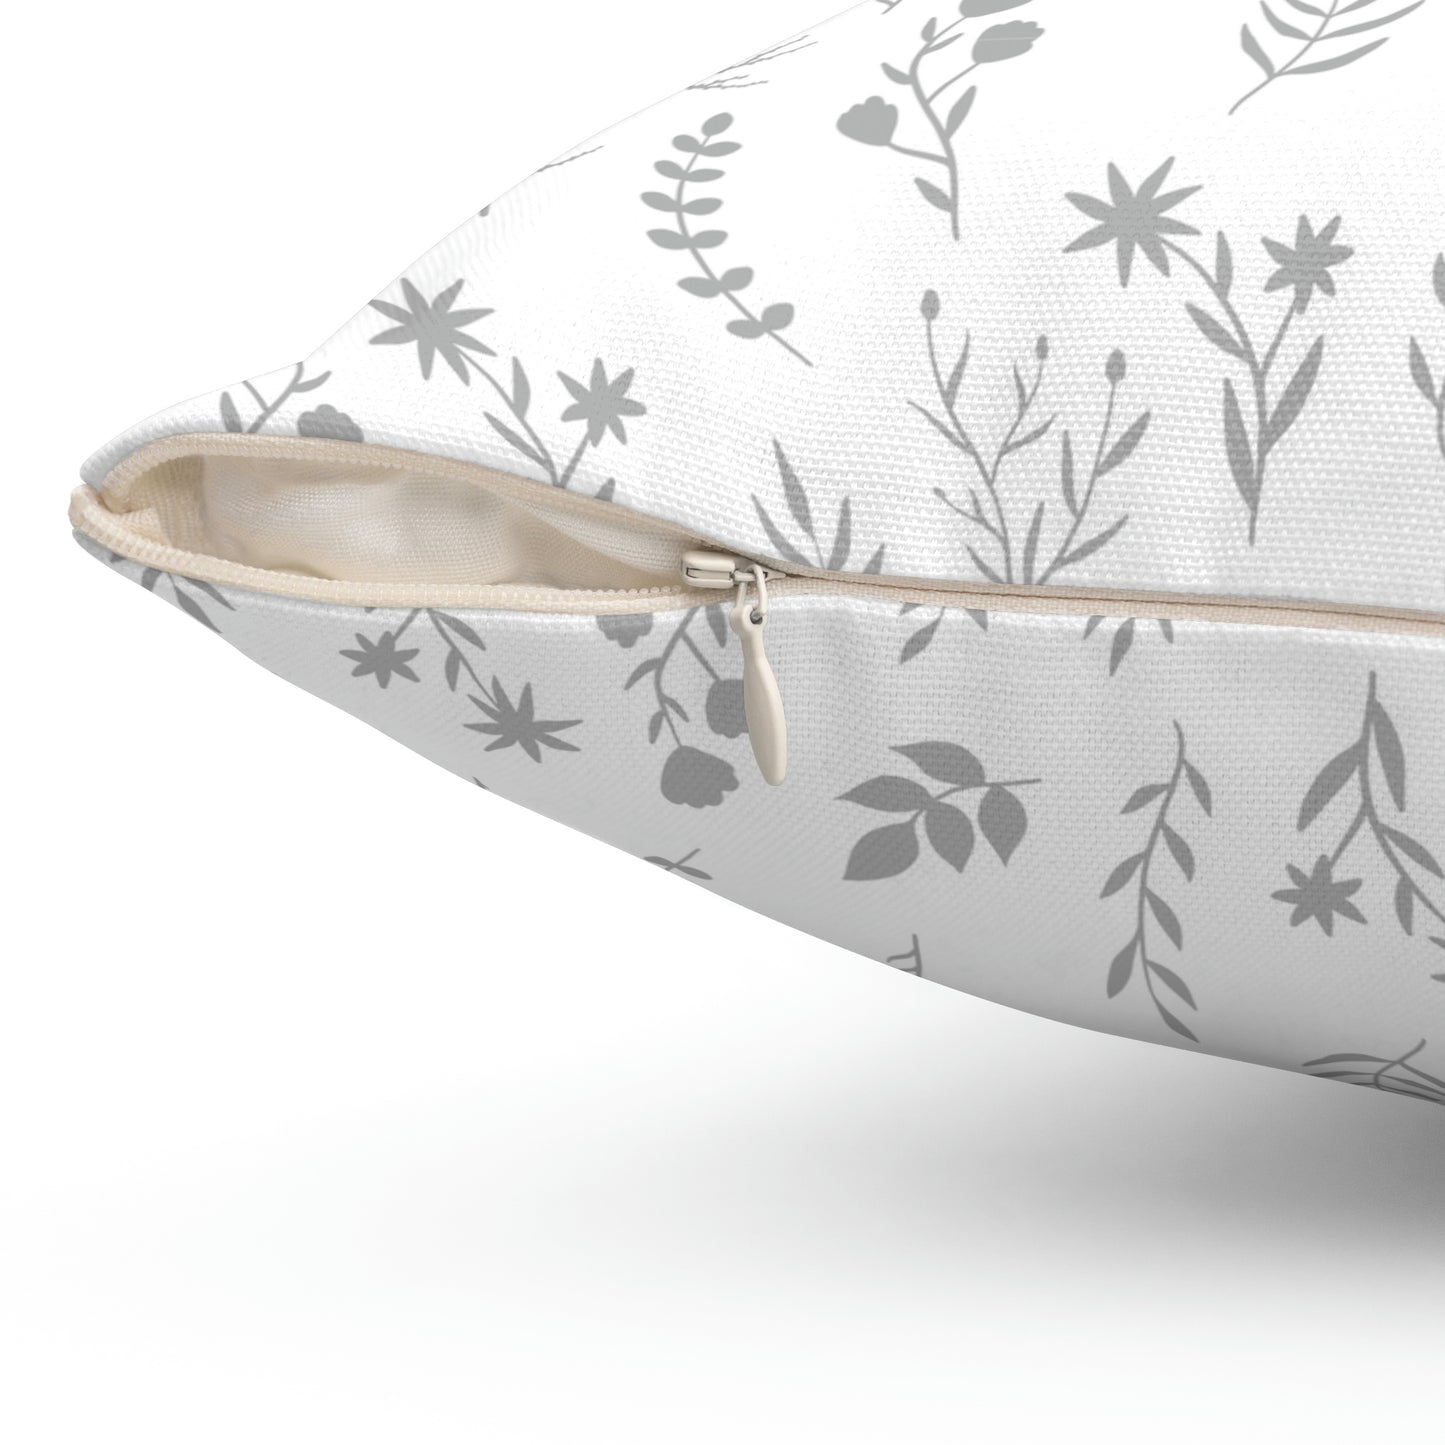 Soft Grey and White Floral Pillow | Available in 4 Sizes